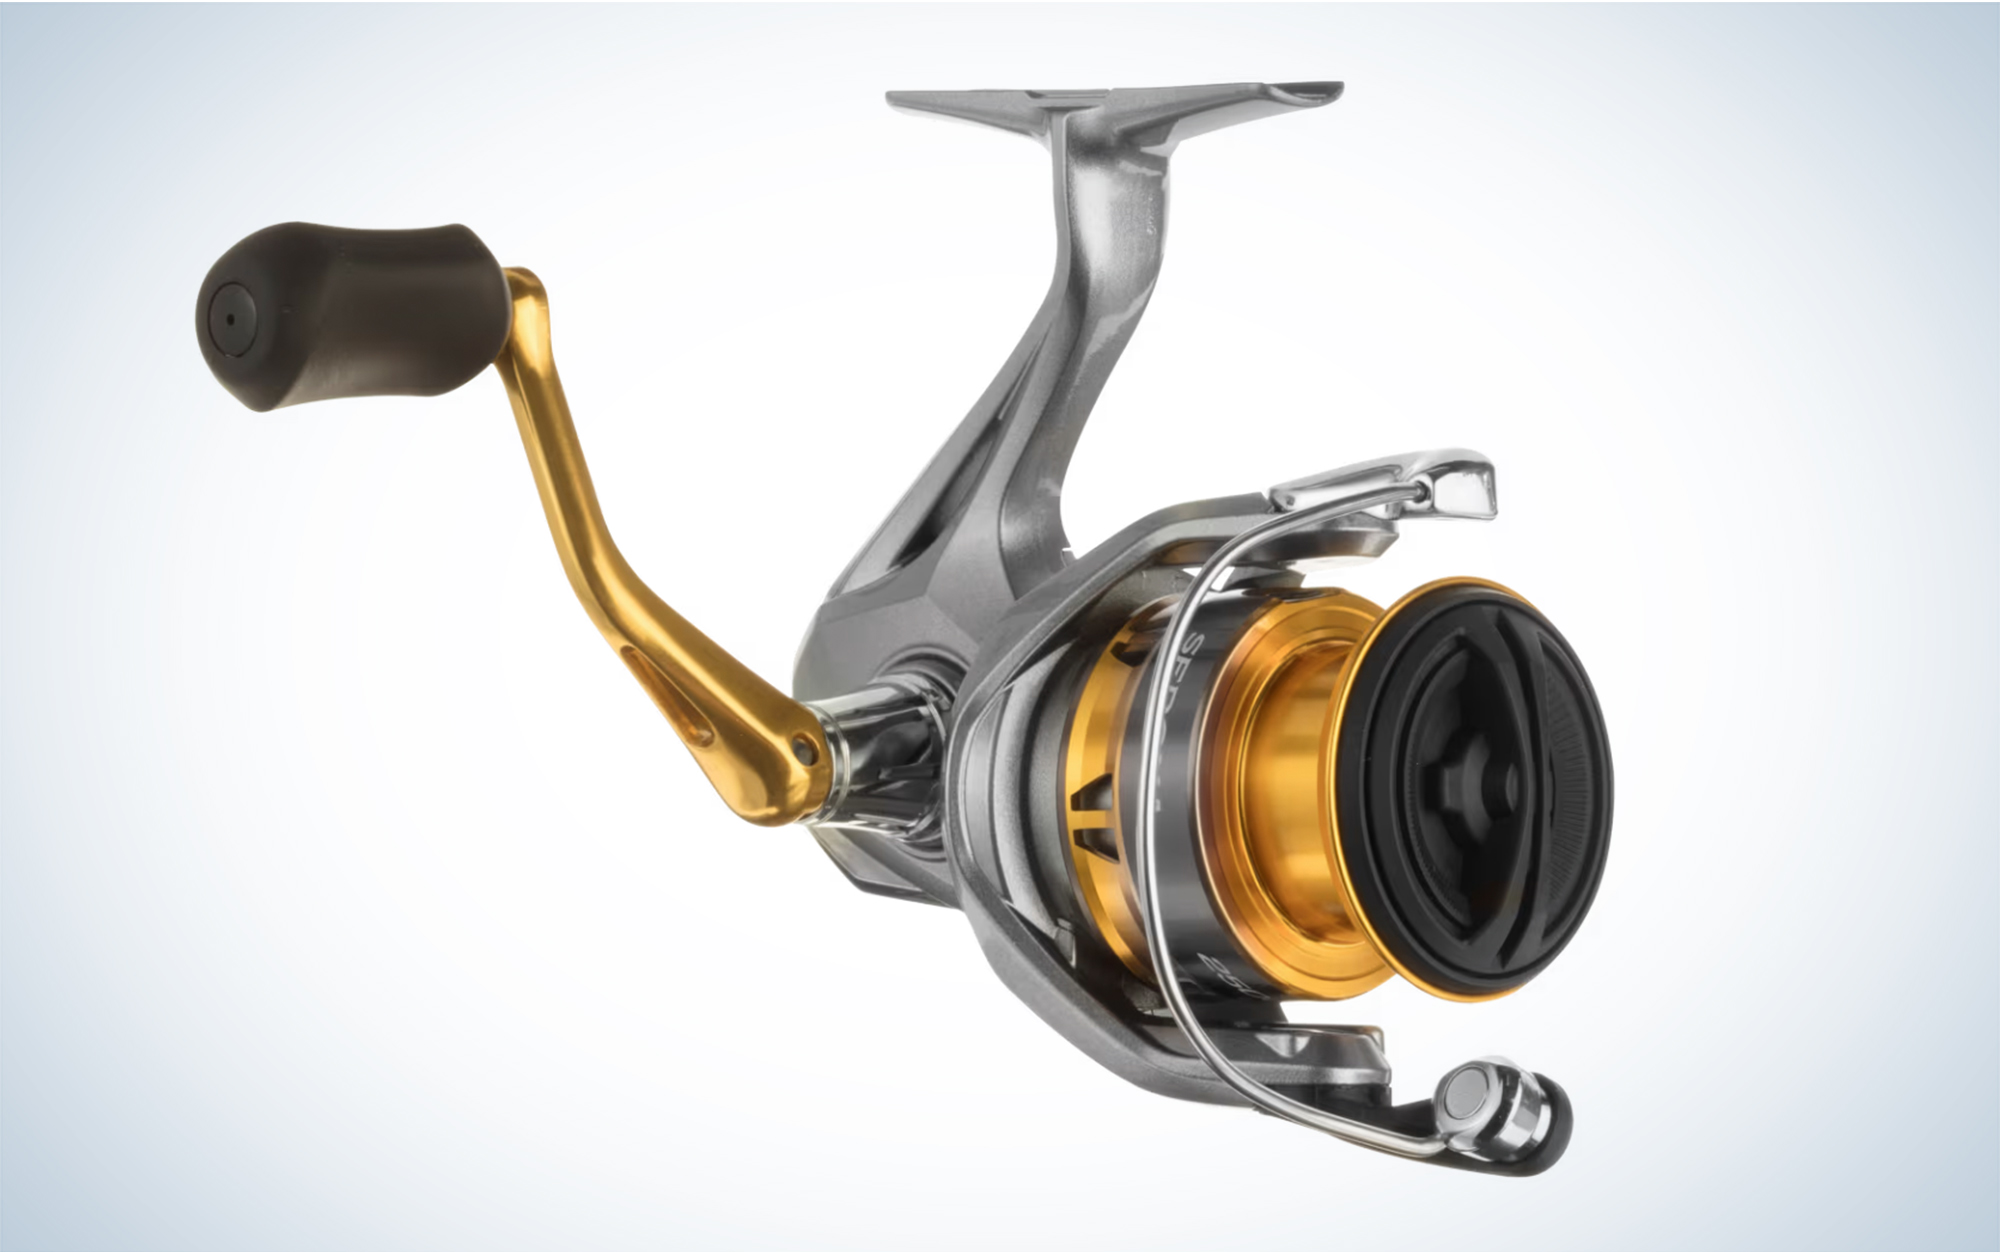 Overview Of The 5 Different Types Of Fishing Reels - International